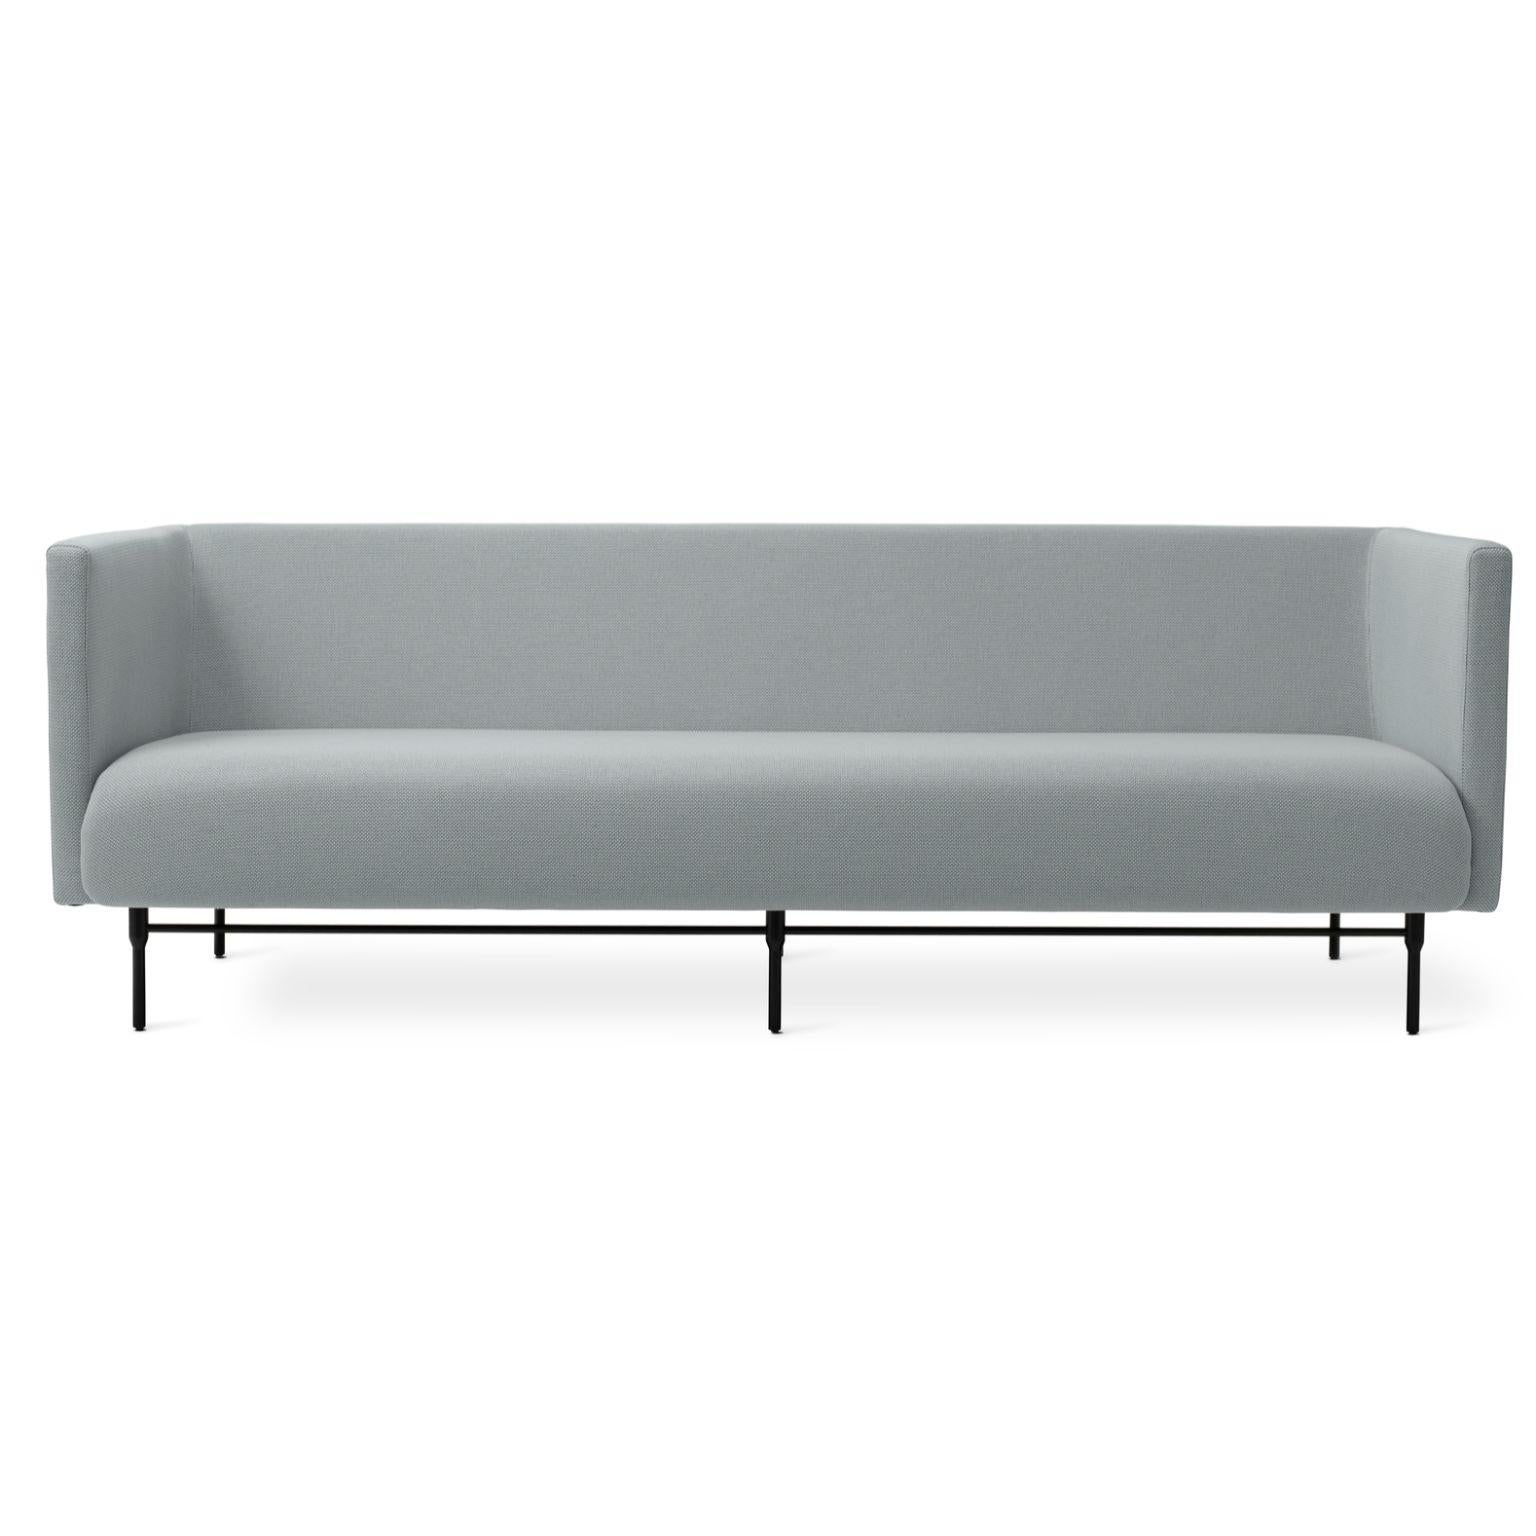 Galore 3 seater minty grey by Warm Nordic
Dimensions: D222 x W83 x H 76 cm
Material: Textile upholstery, Powder coated black steel legs, Wooden frame, foam, spring system.
Weight: 62 kg
Also available in different colours and finishes. 

Warm